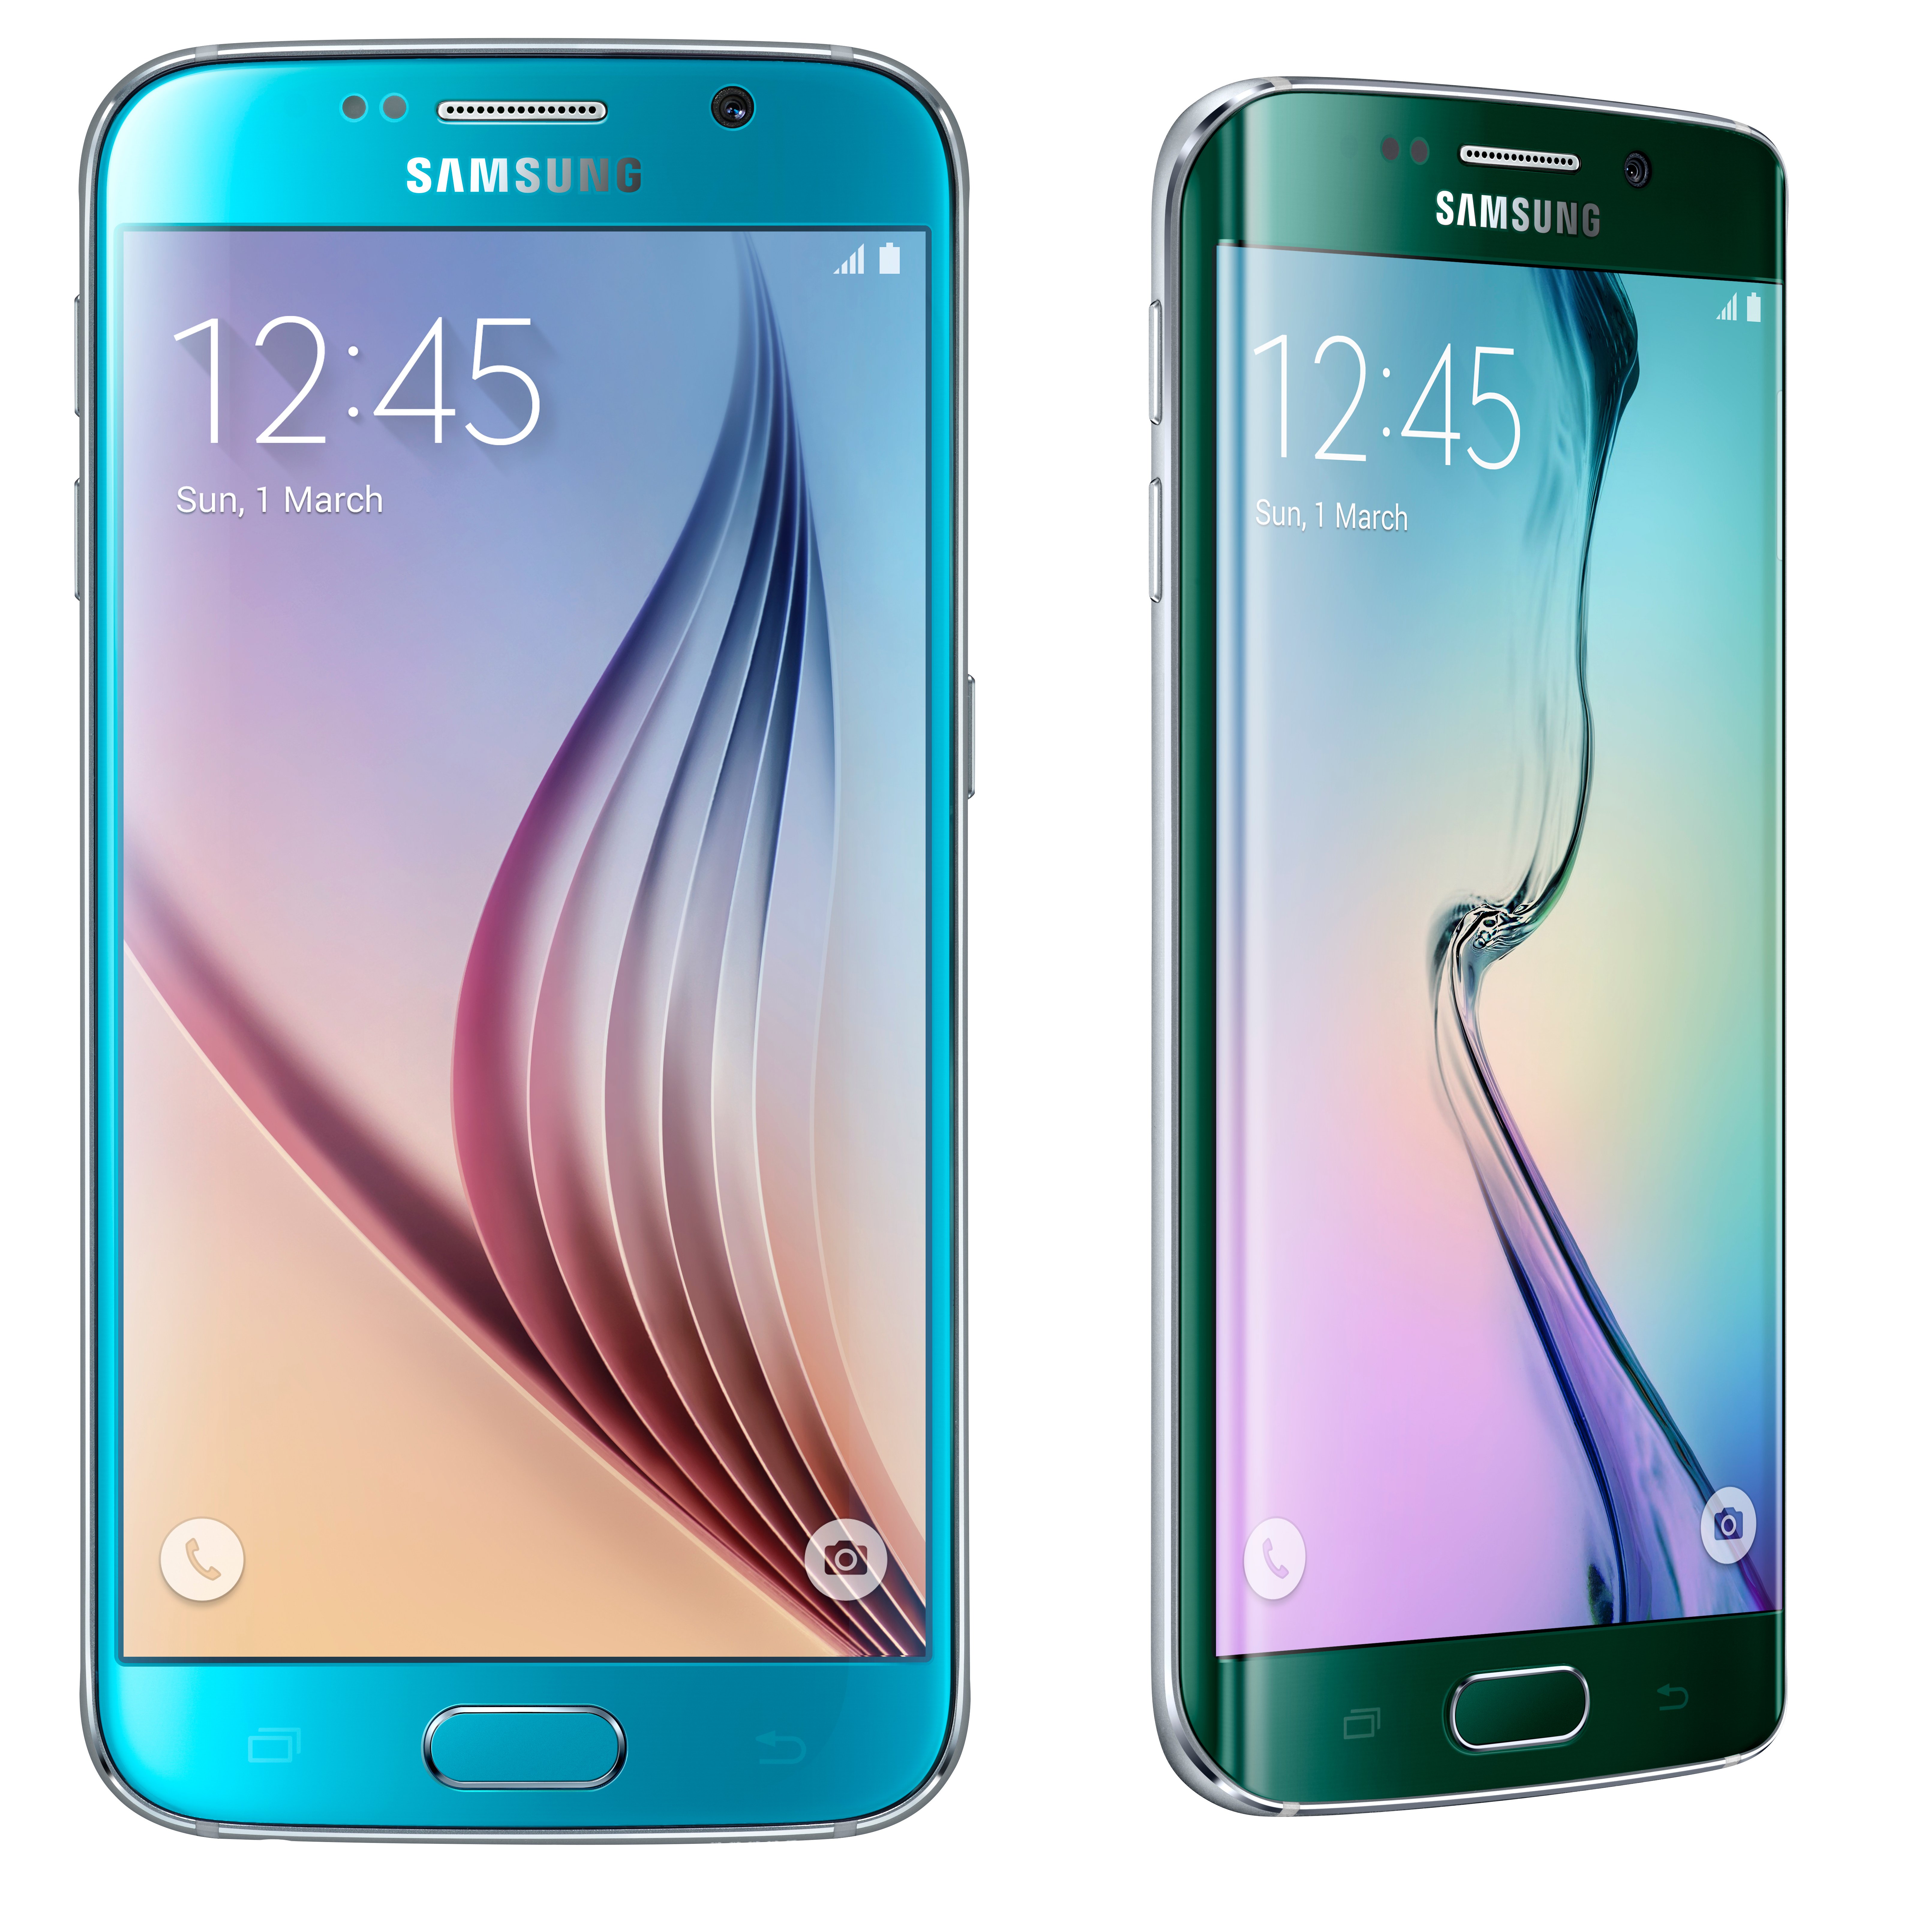 What buyers need to know about the Galaxy S6 vs Galaxy S6 Edge comparison.